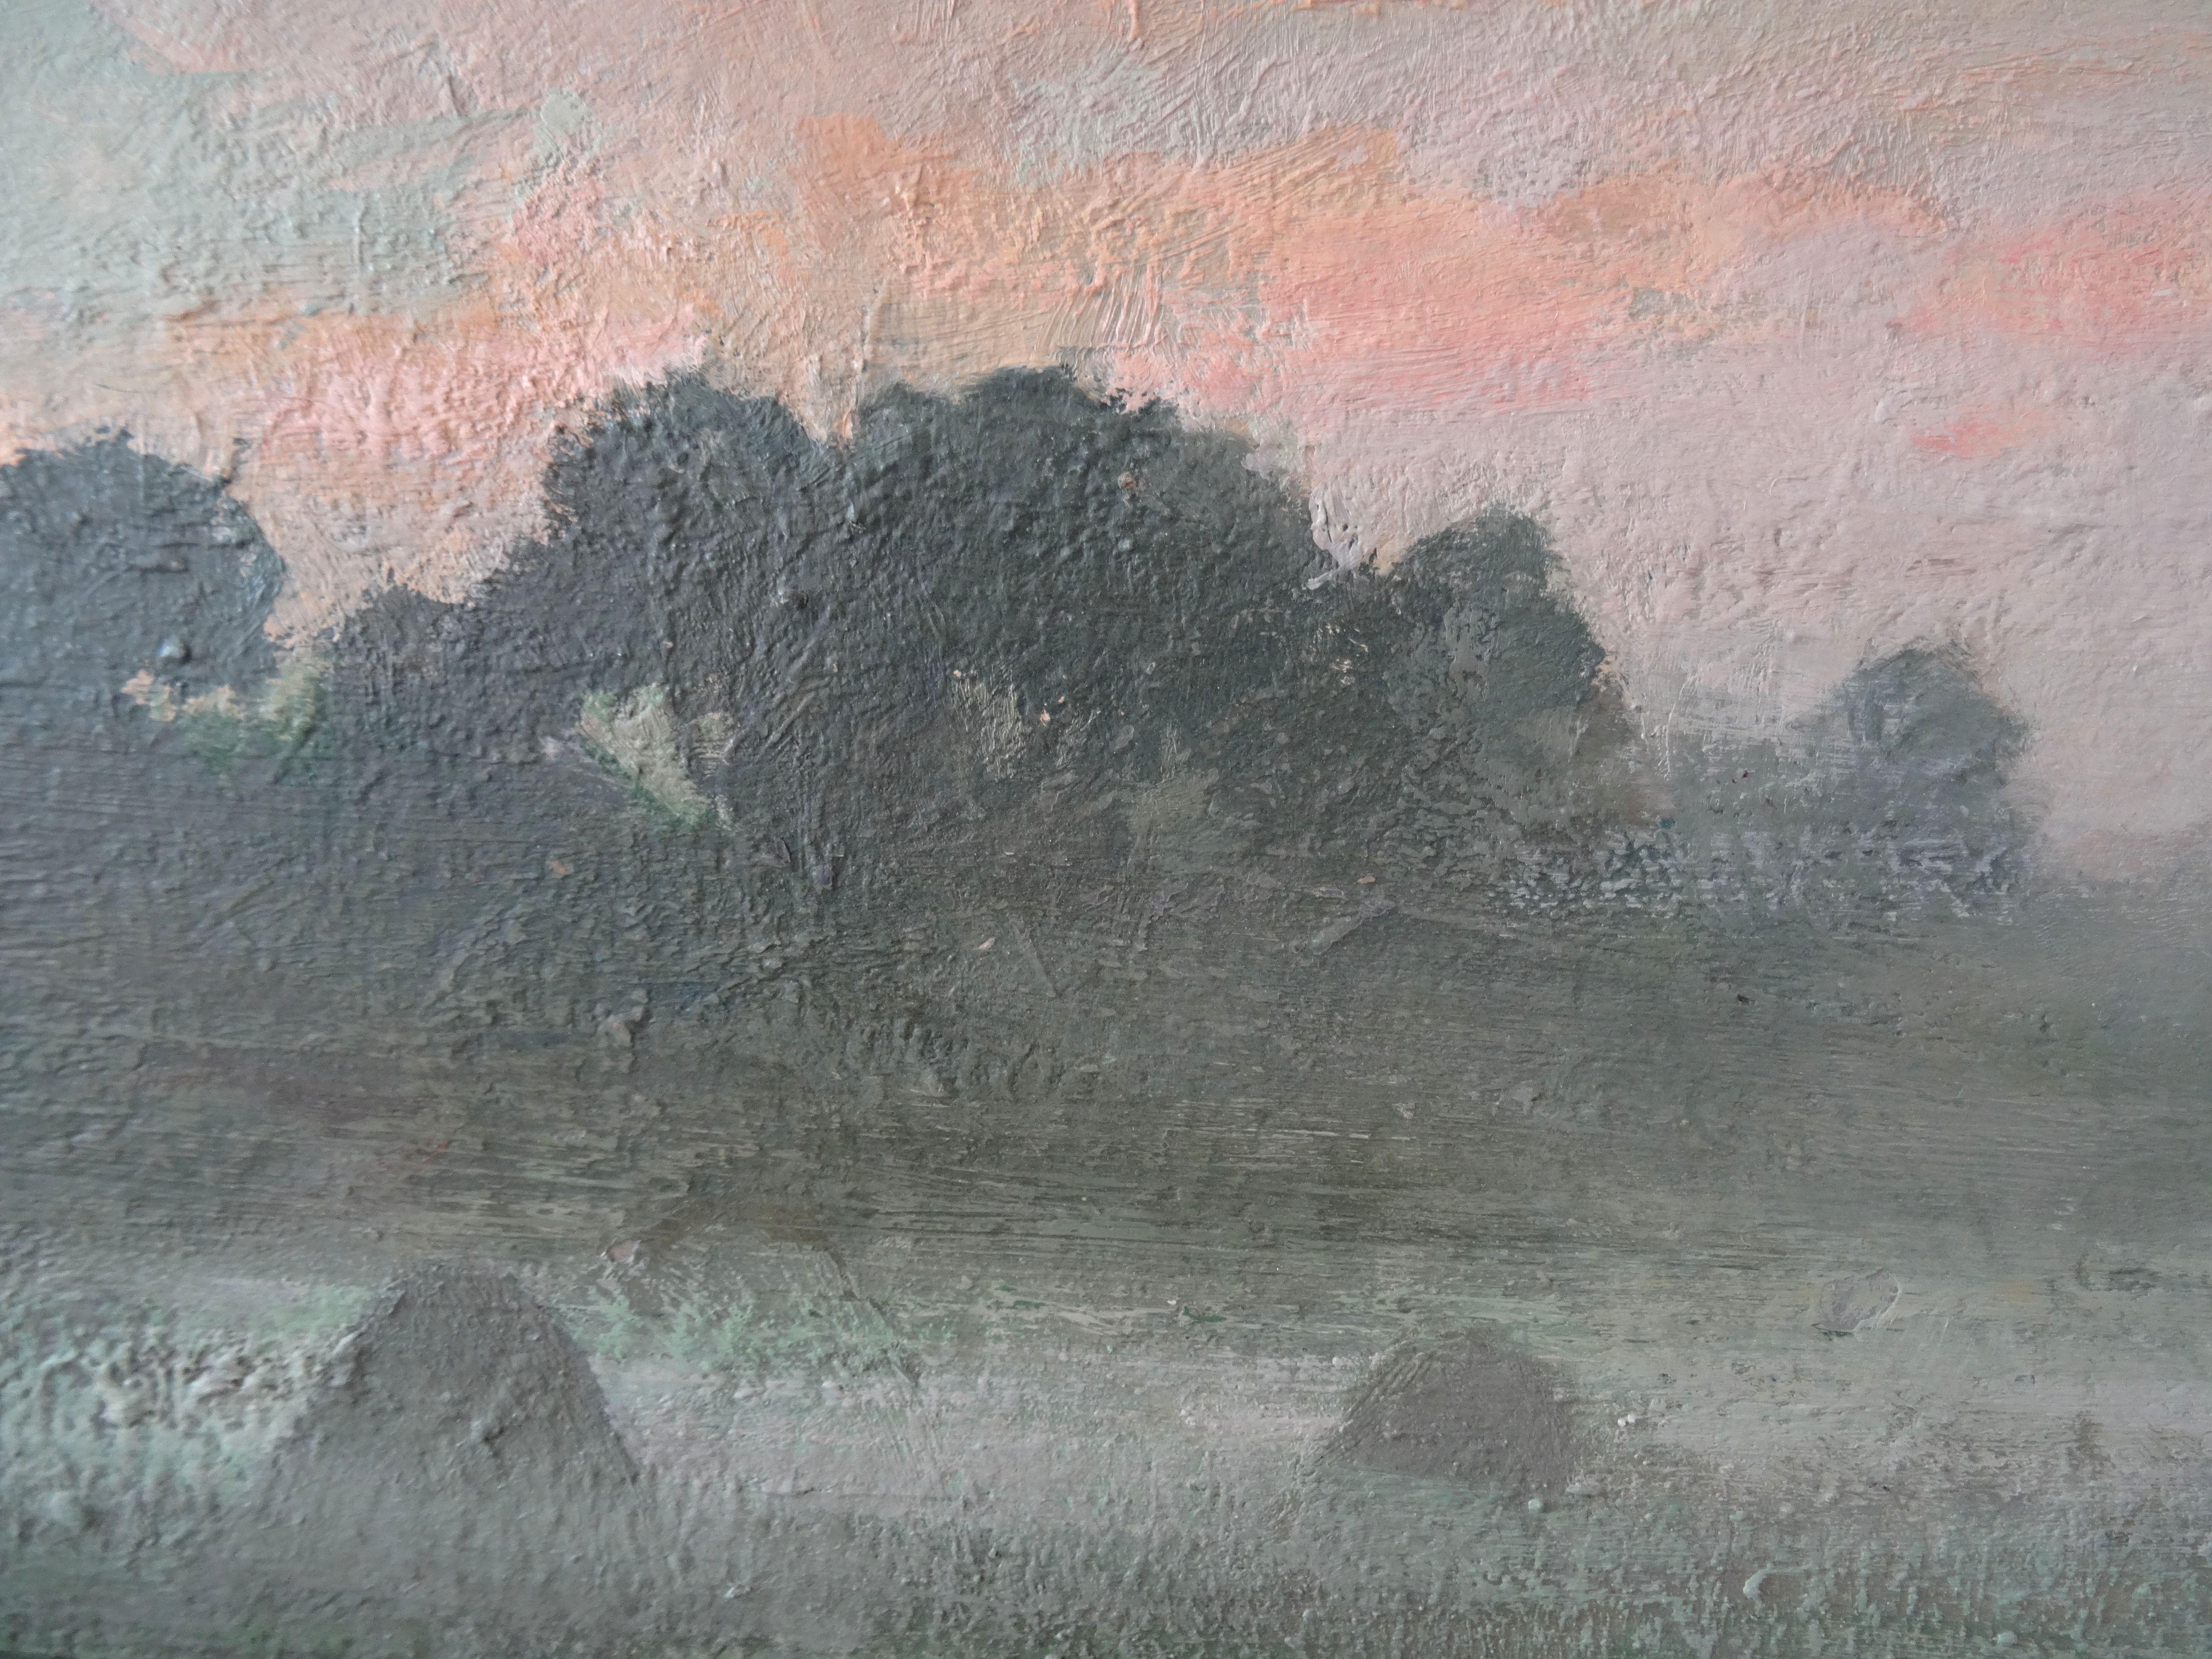 Morning fog. 1975., cardboard, oil, 49x69 cm
Realistic early morning landscape in the village with haystacks in the fog

Alfejs Bromults (1913.3.IV - 1991.11.I)

His first professional education was at National University at studies to R.Suta, J.